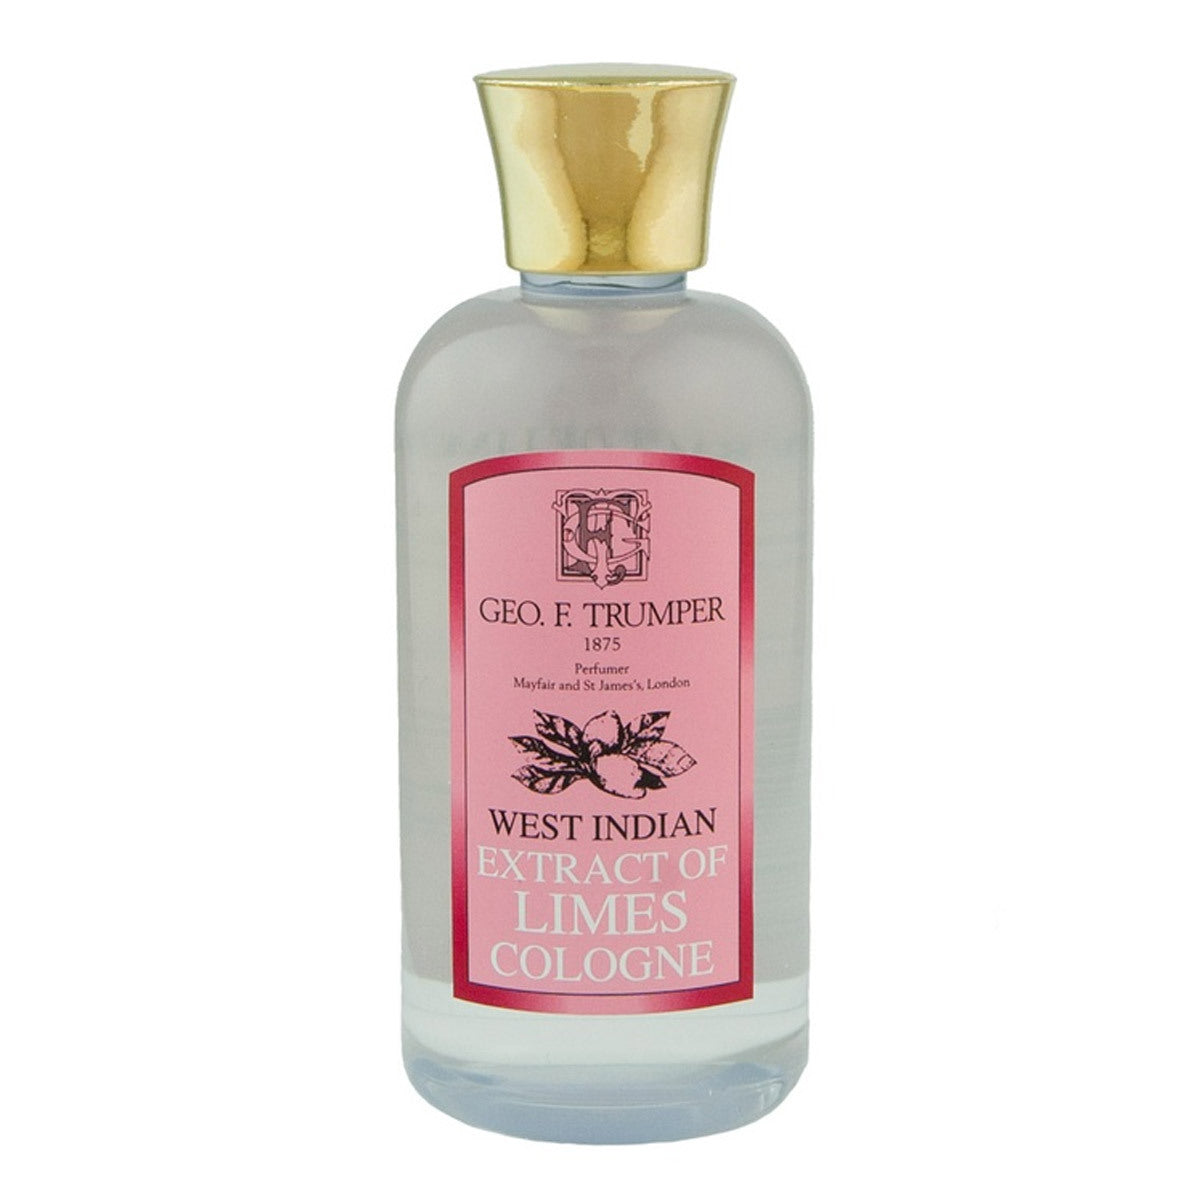 Primary image of Extract of Limes Cologne